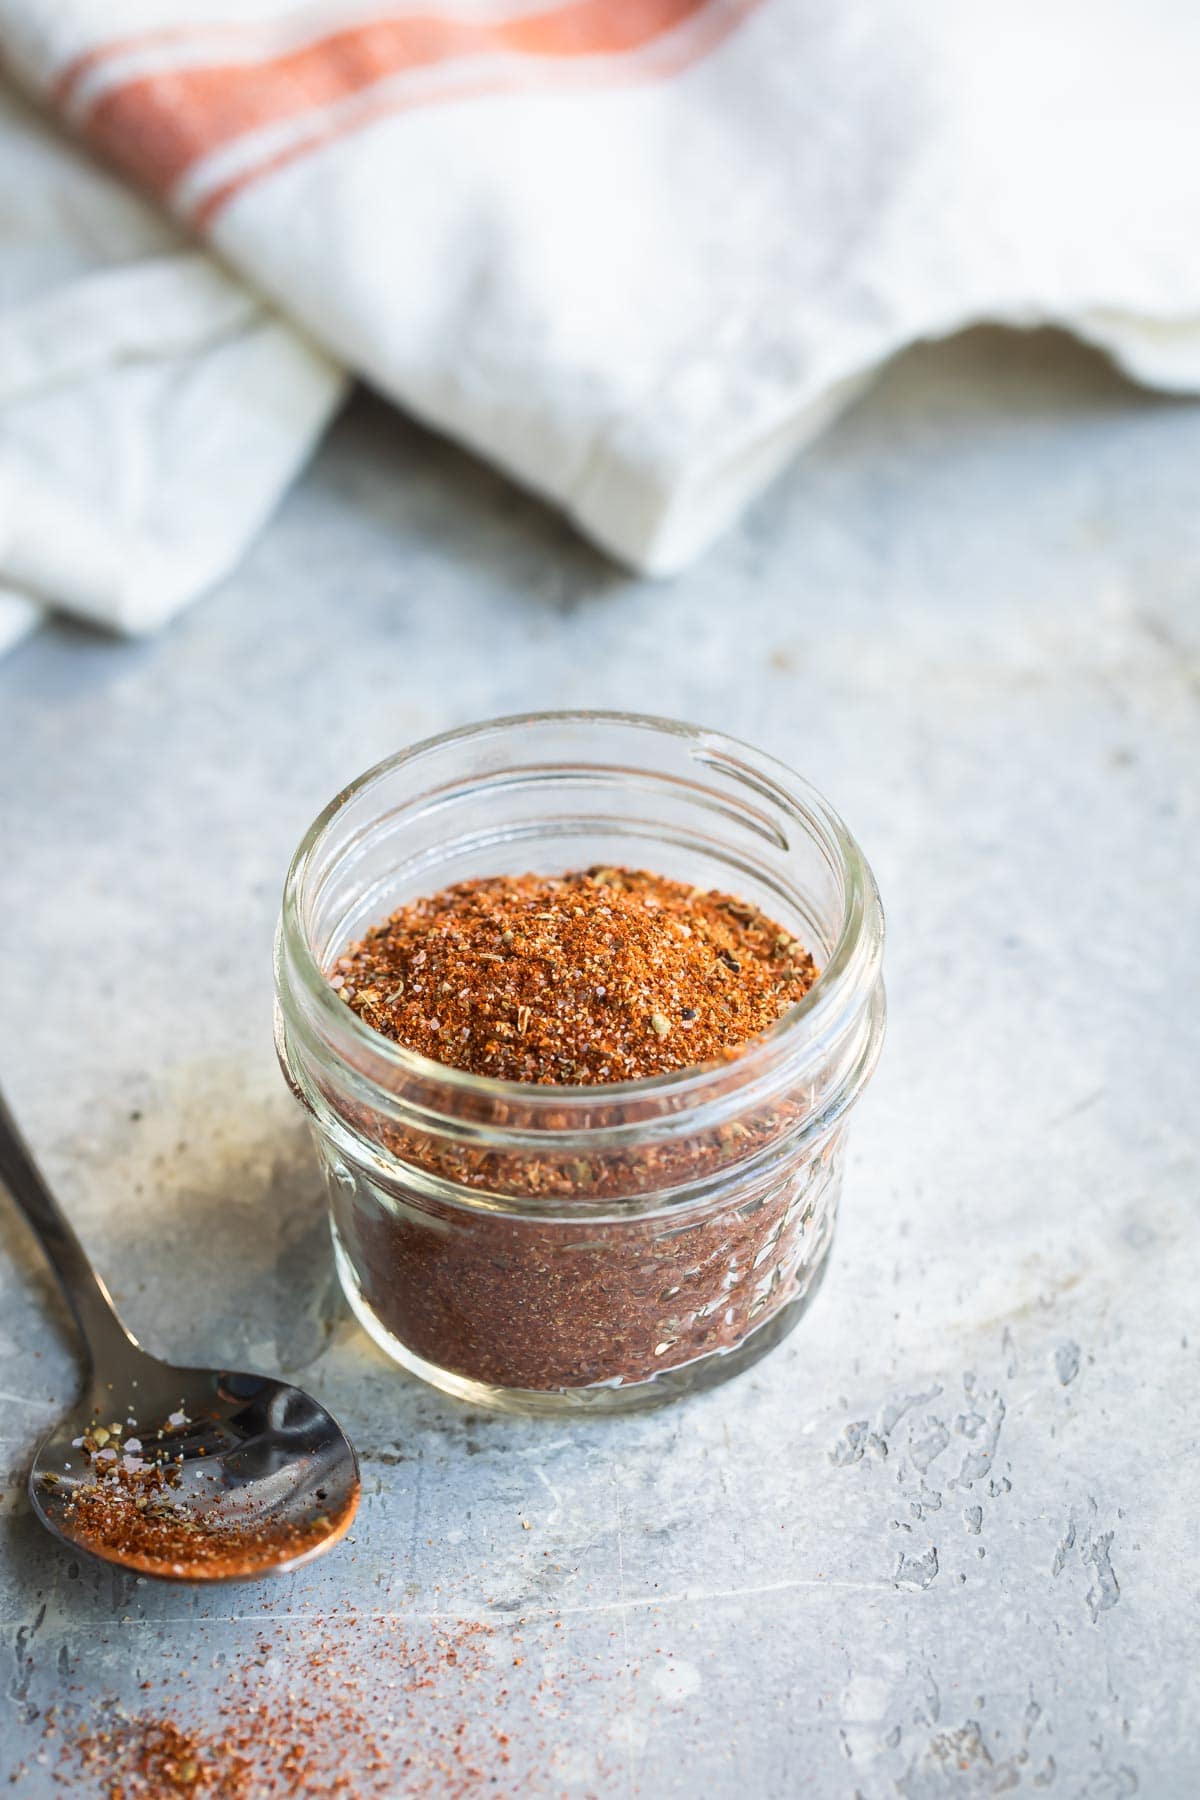 Creole seasoning in a small clear jar.